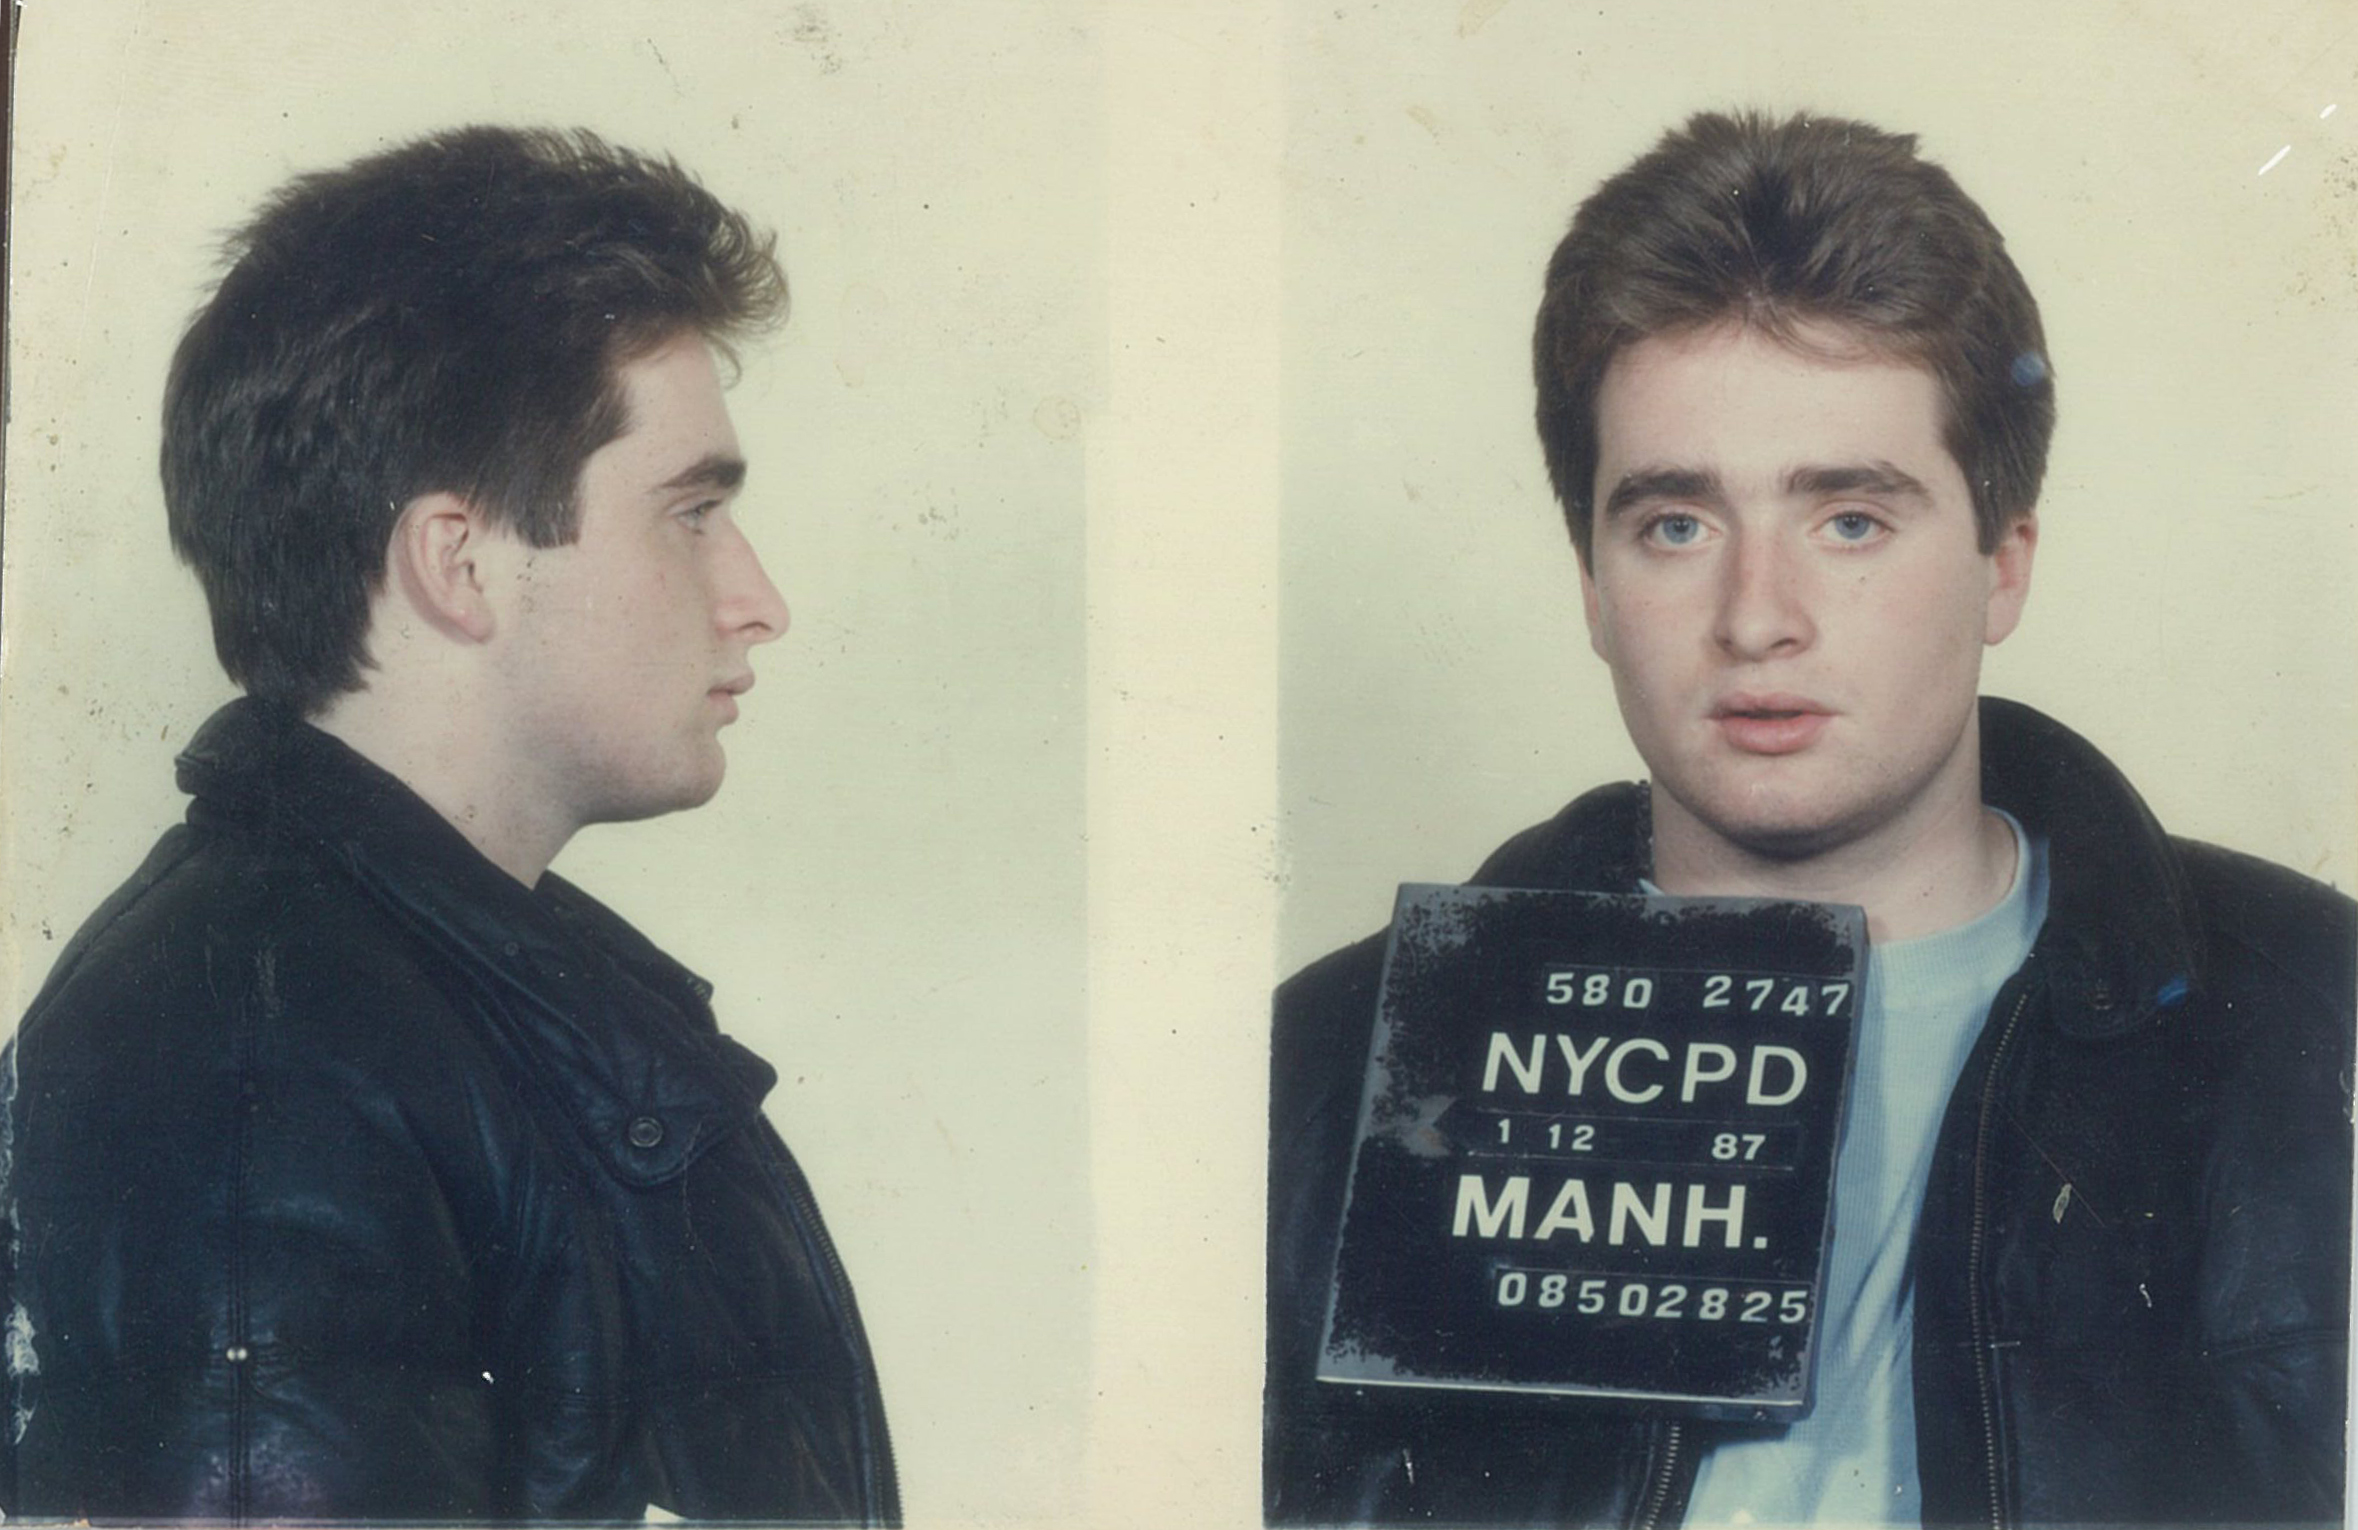 21 Jerry as NYCPD.jpg